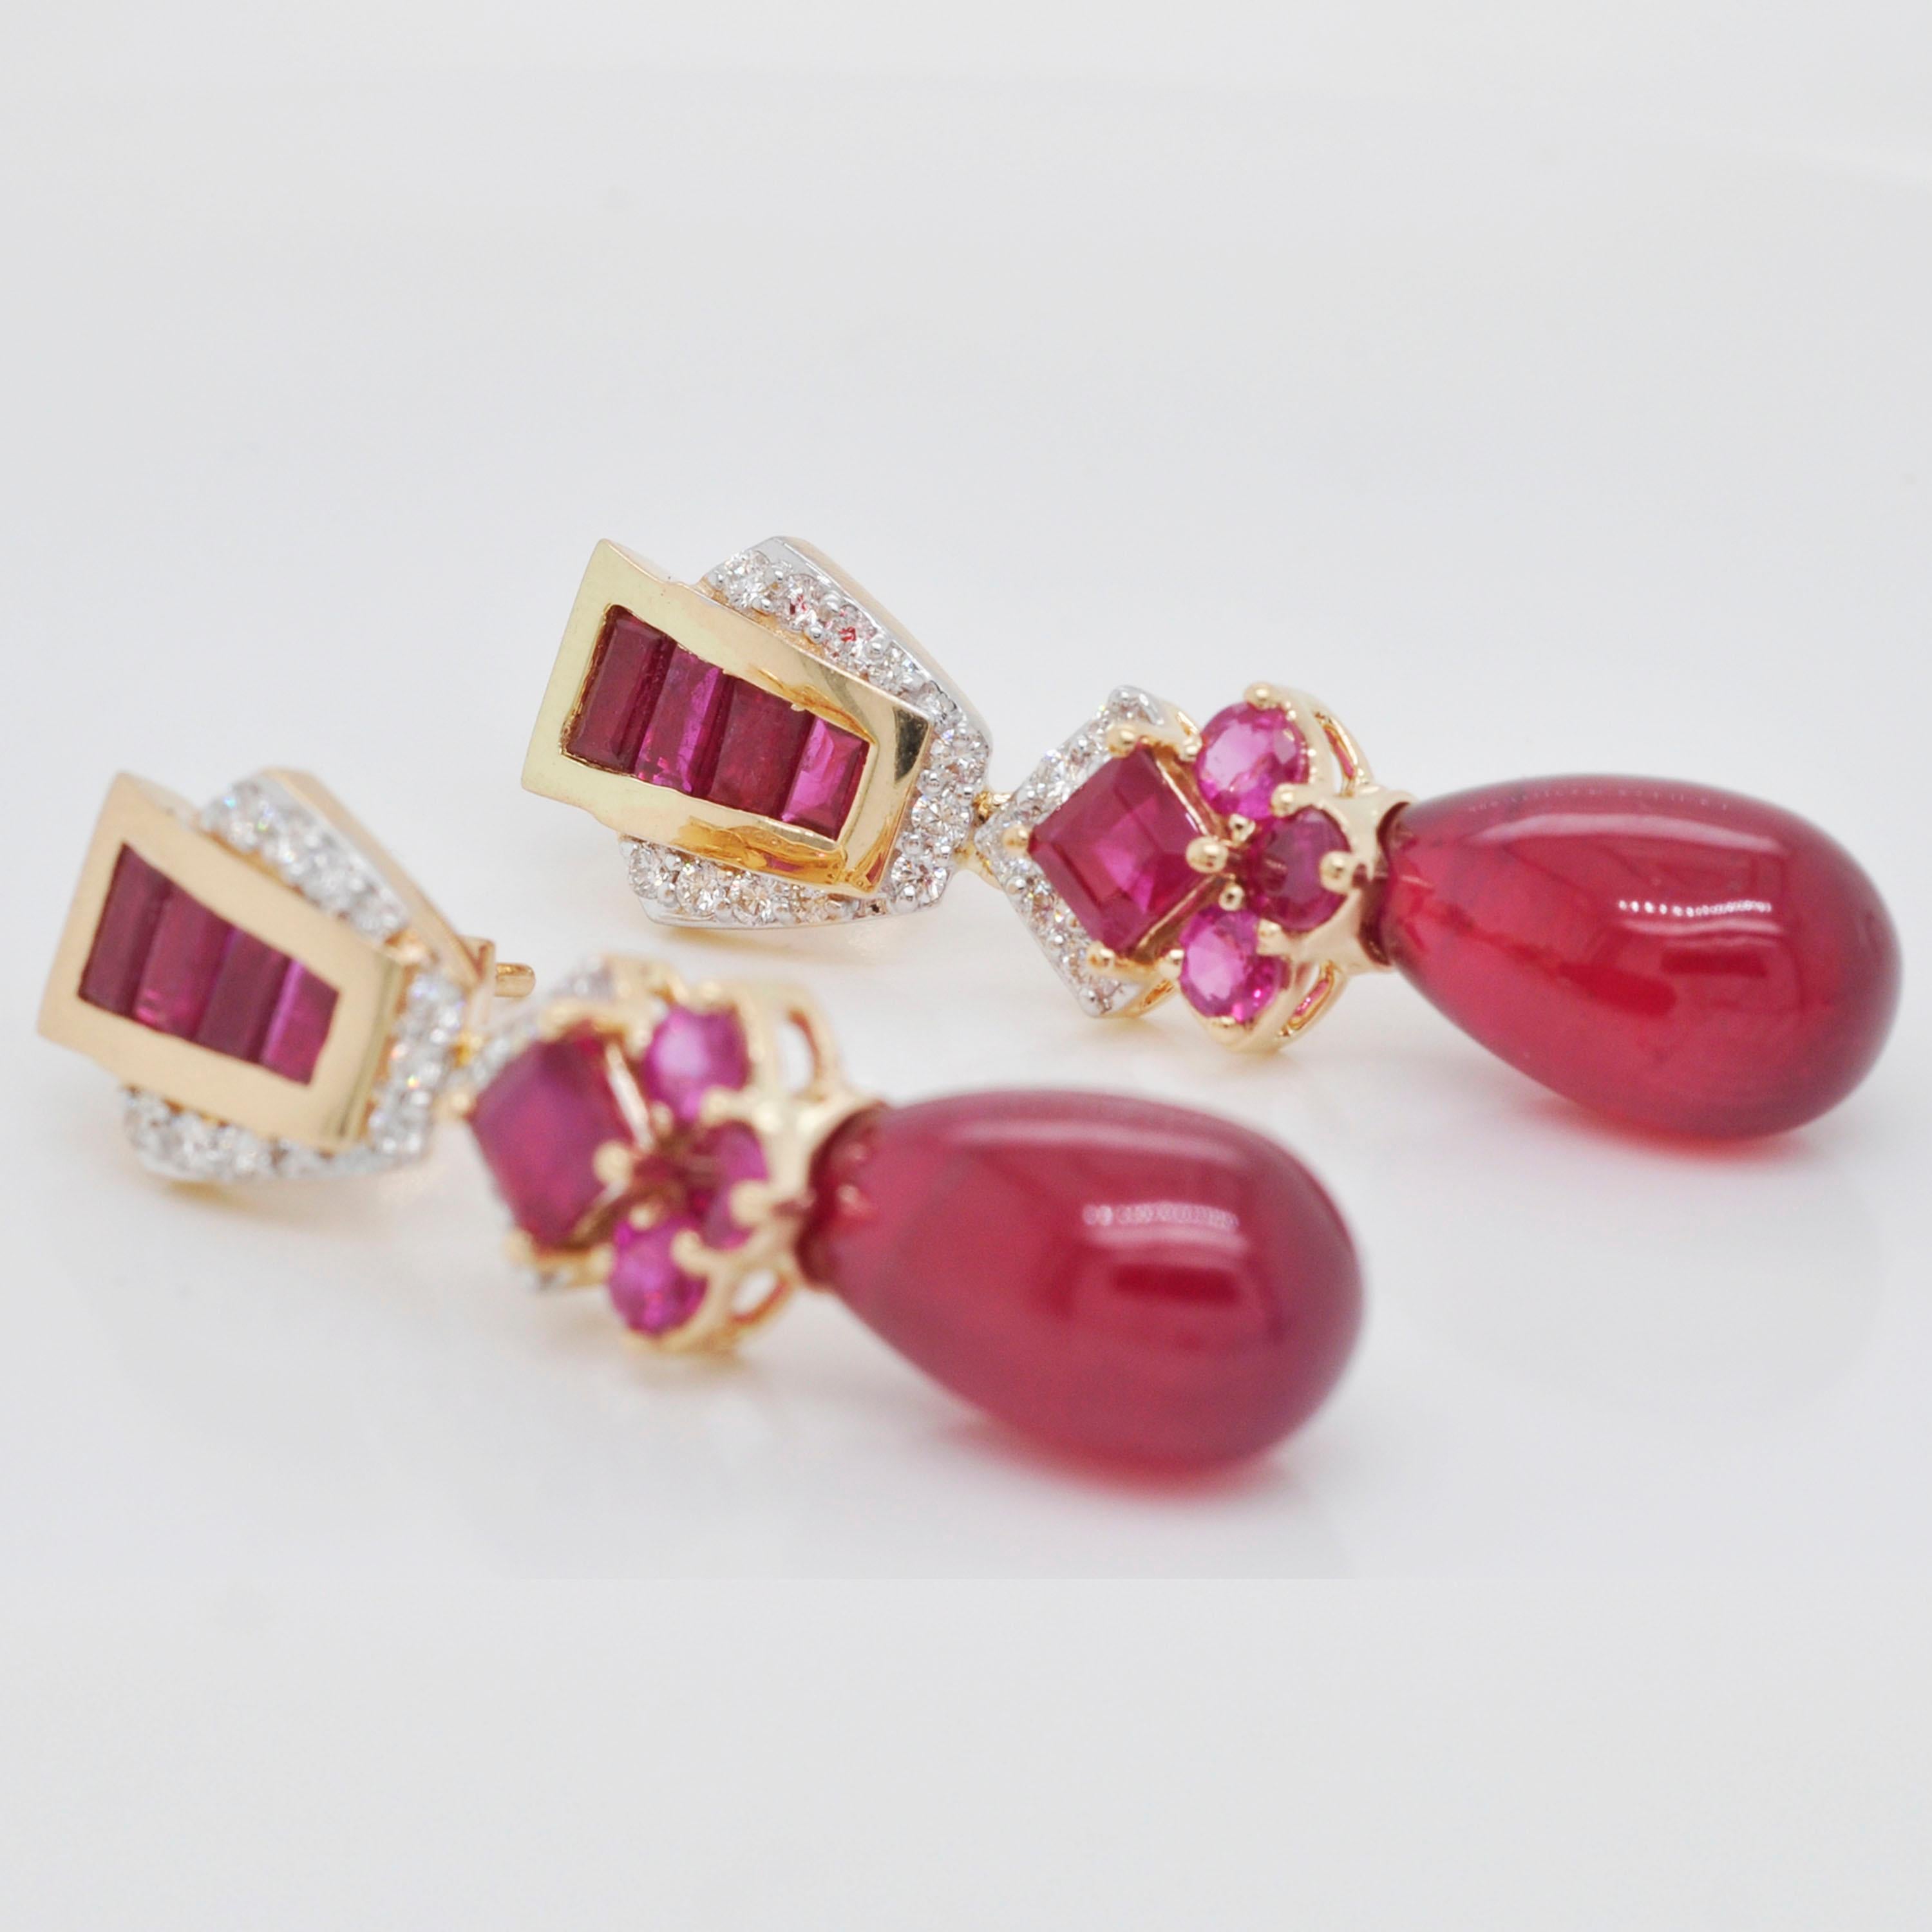 18 karat gold ruby baguette ruby drop diamond dangle earrings.

This adorable and glamorous crimson red ruby and drop earring is splendid. The formation of baguettes, squares, rounds and drop rubies and diamonds in the side pave setting create the